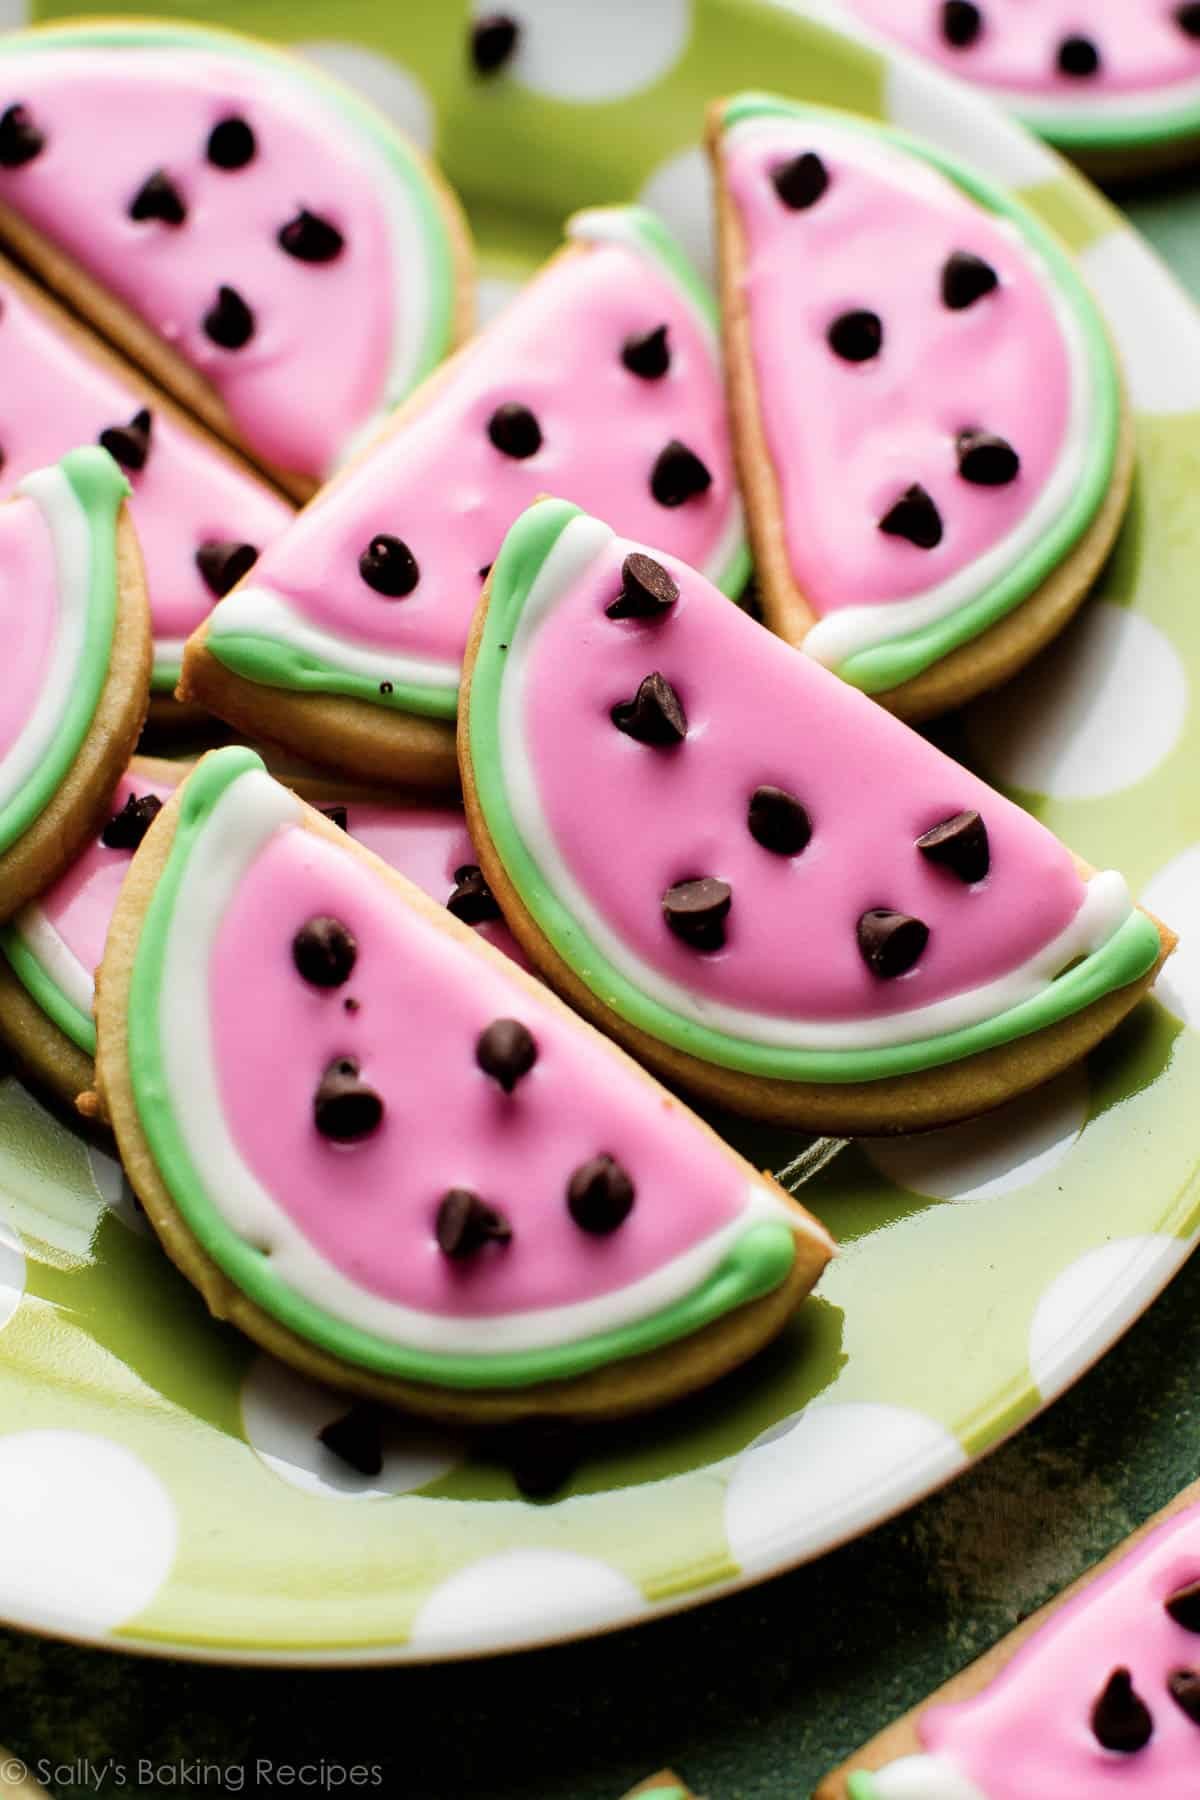 close-up image of watermelon-looking sugar cookies with colorful royal icing.